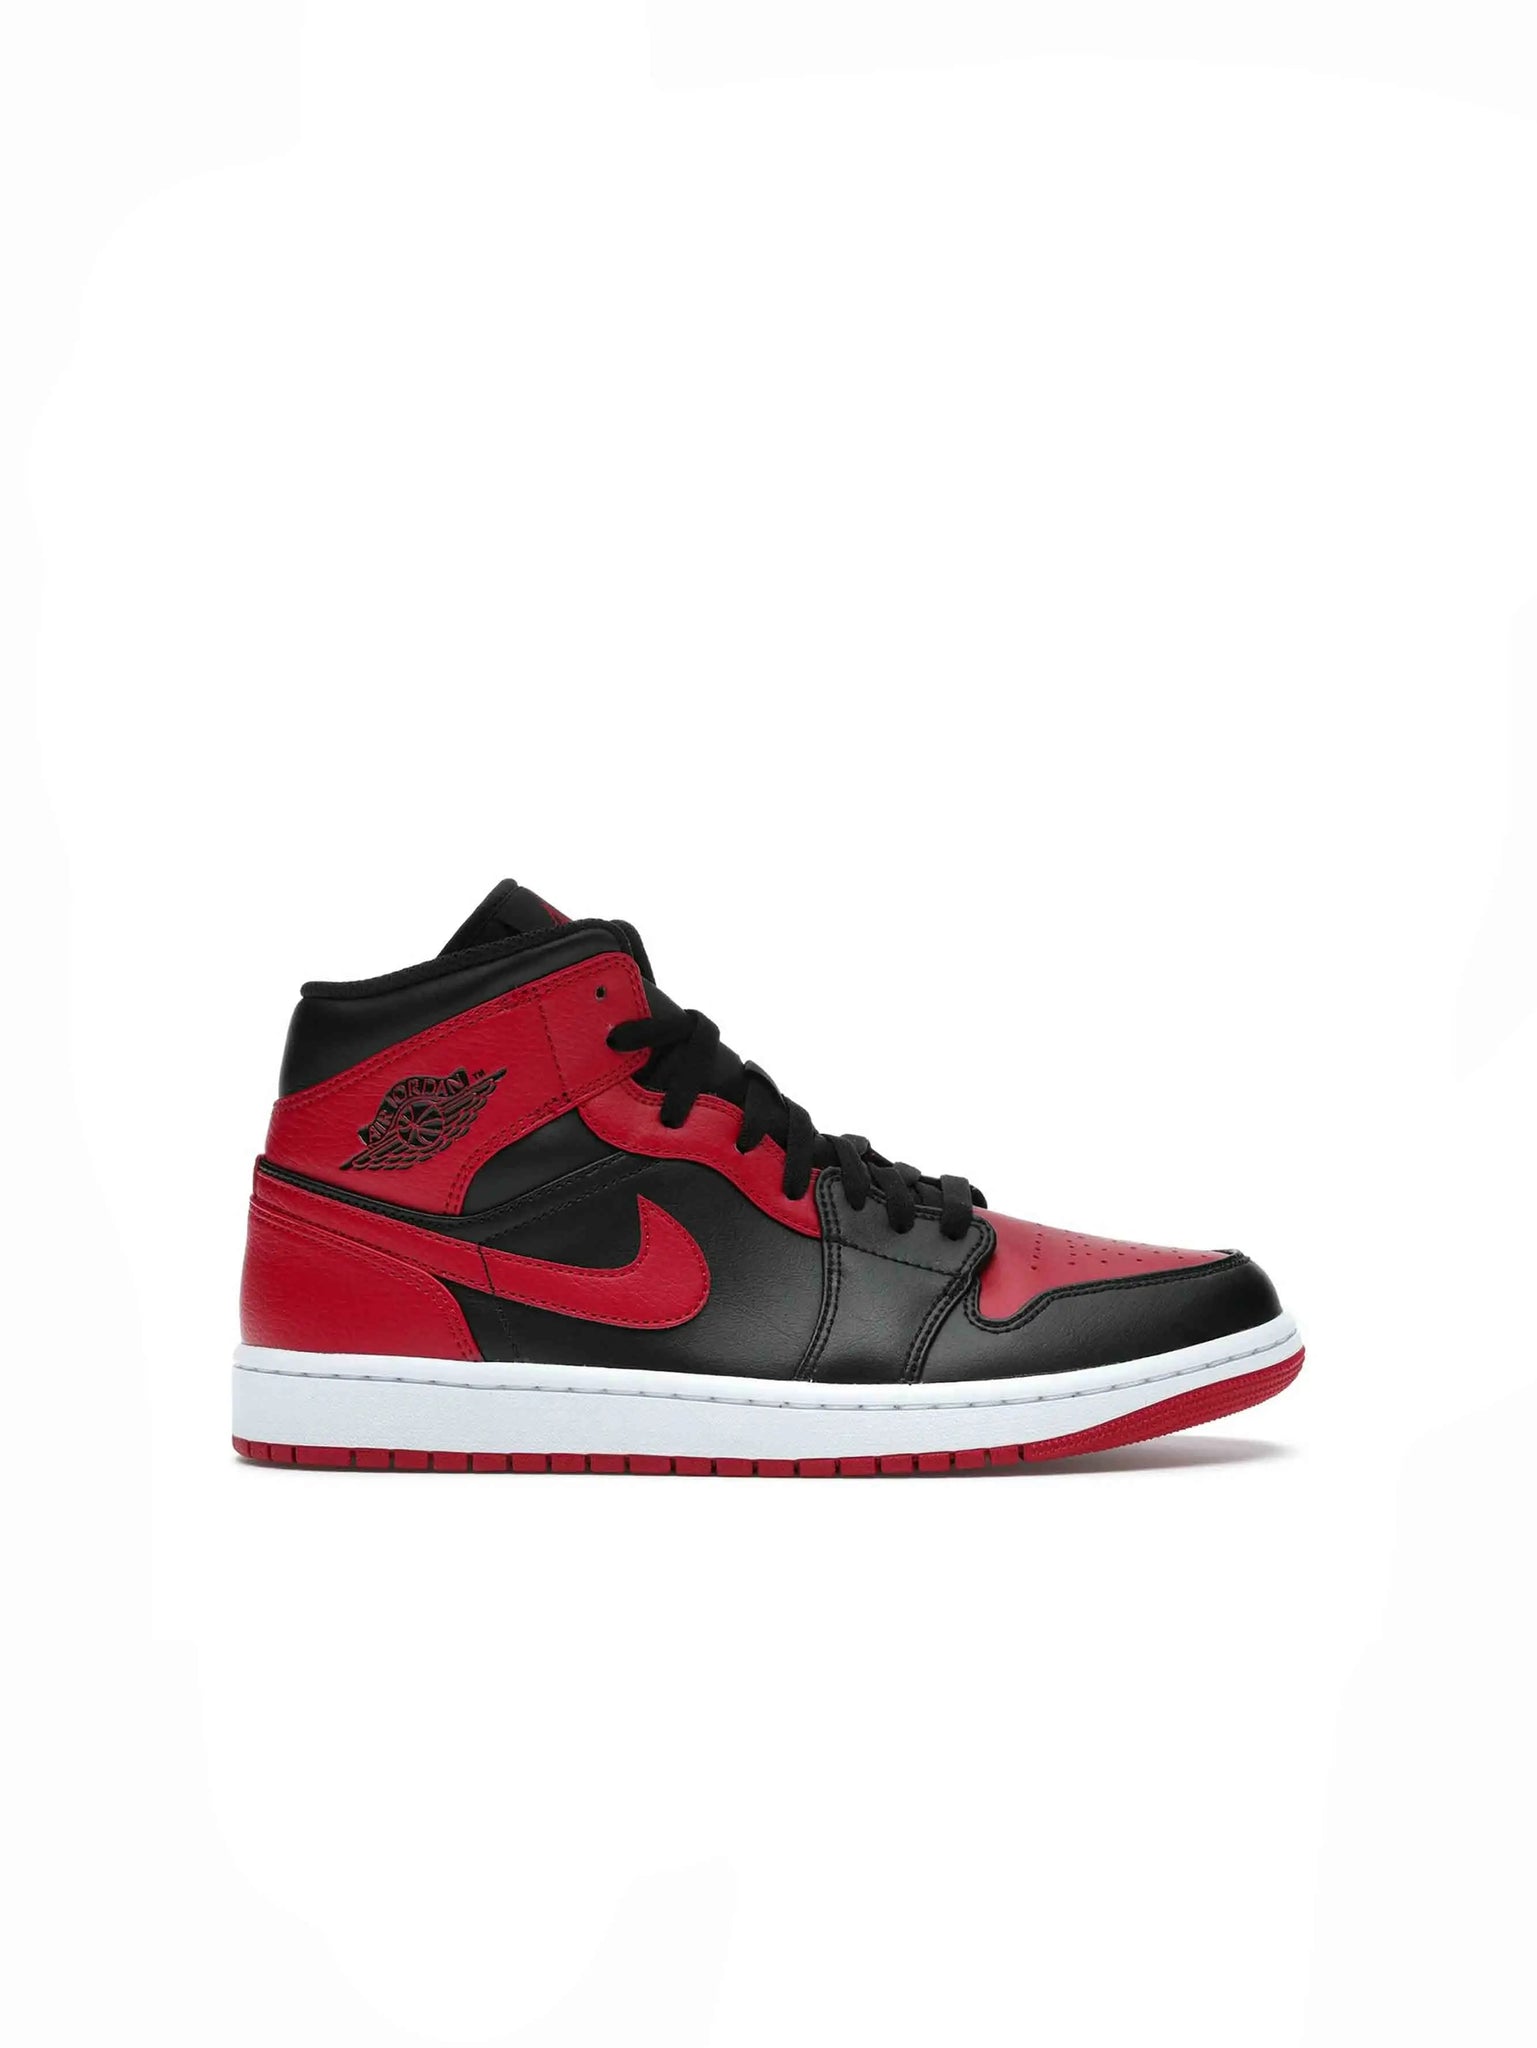 Nike Air Jordan 1 Mid Banned (2020) (GS) in Auckland, New Zealand - Shop name